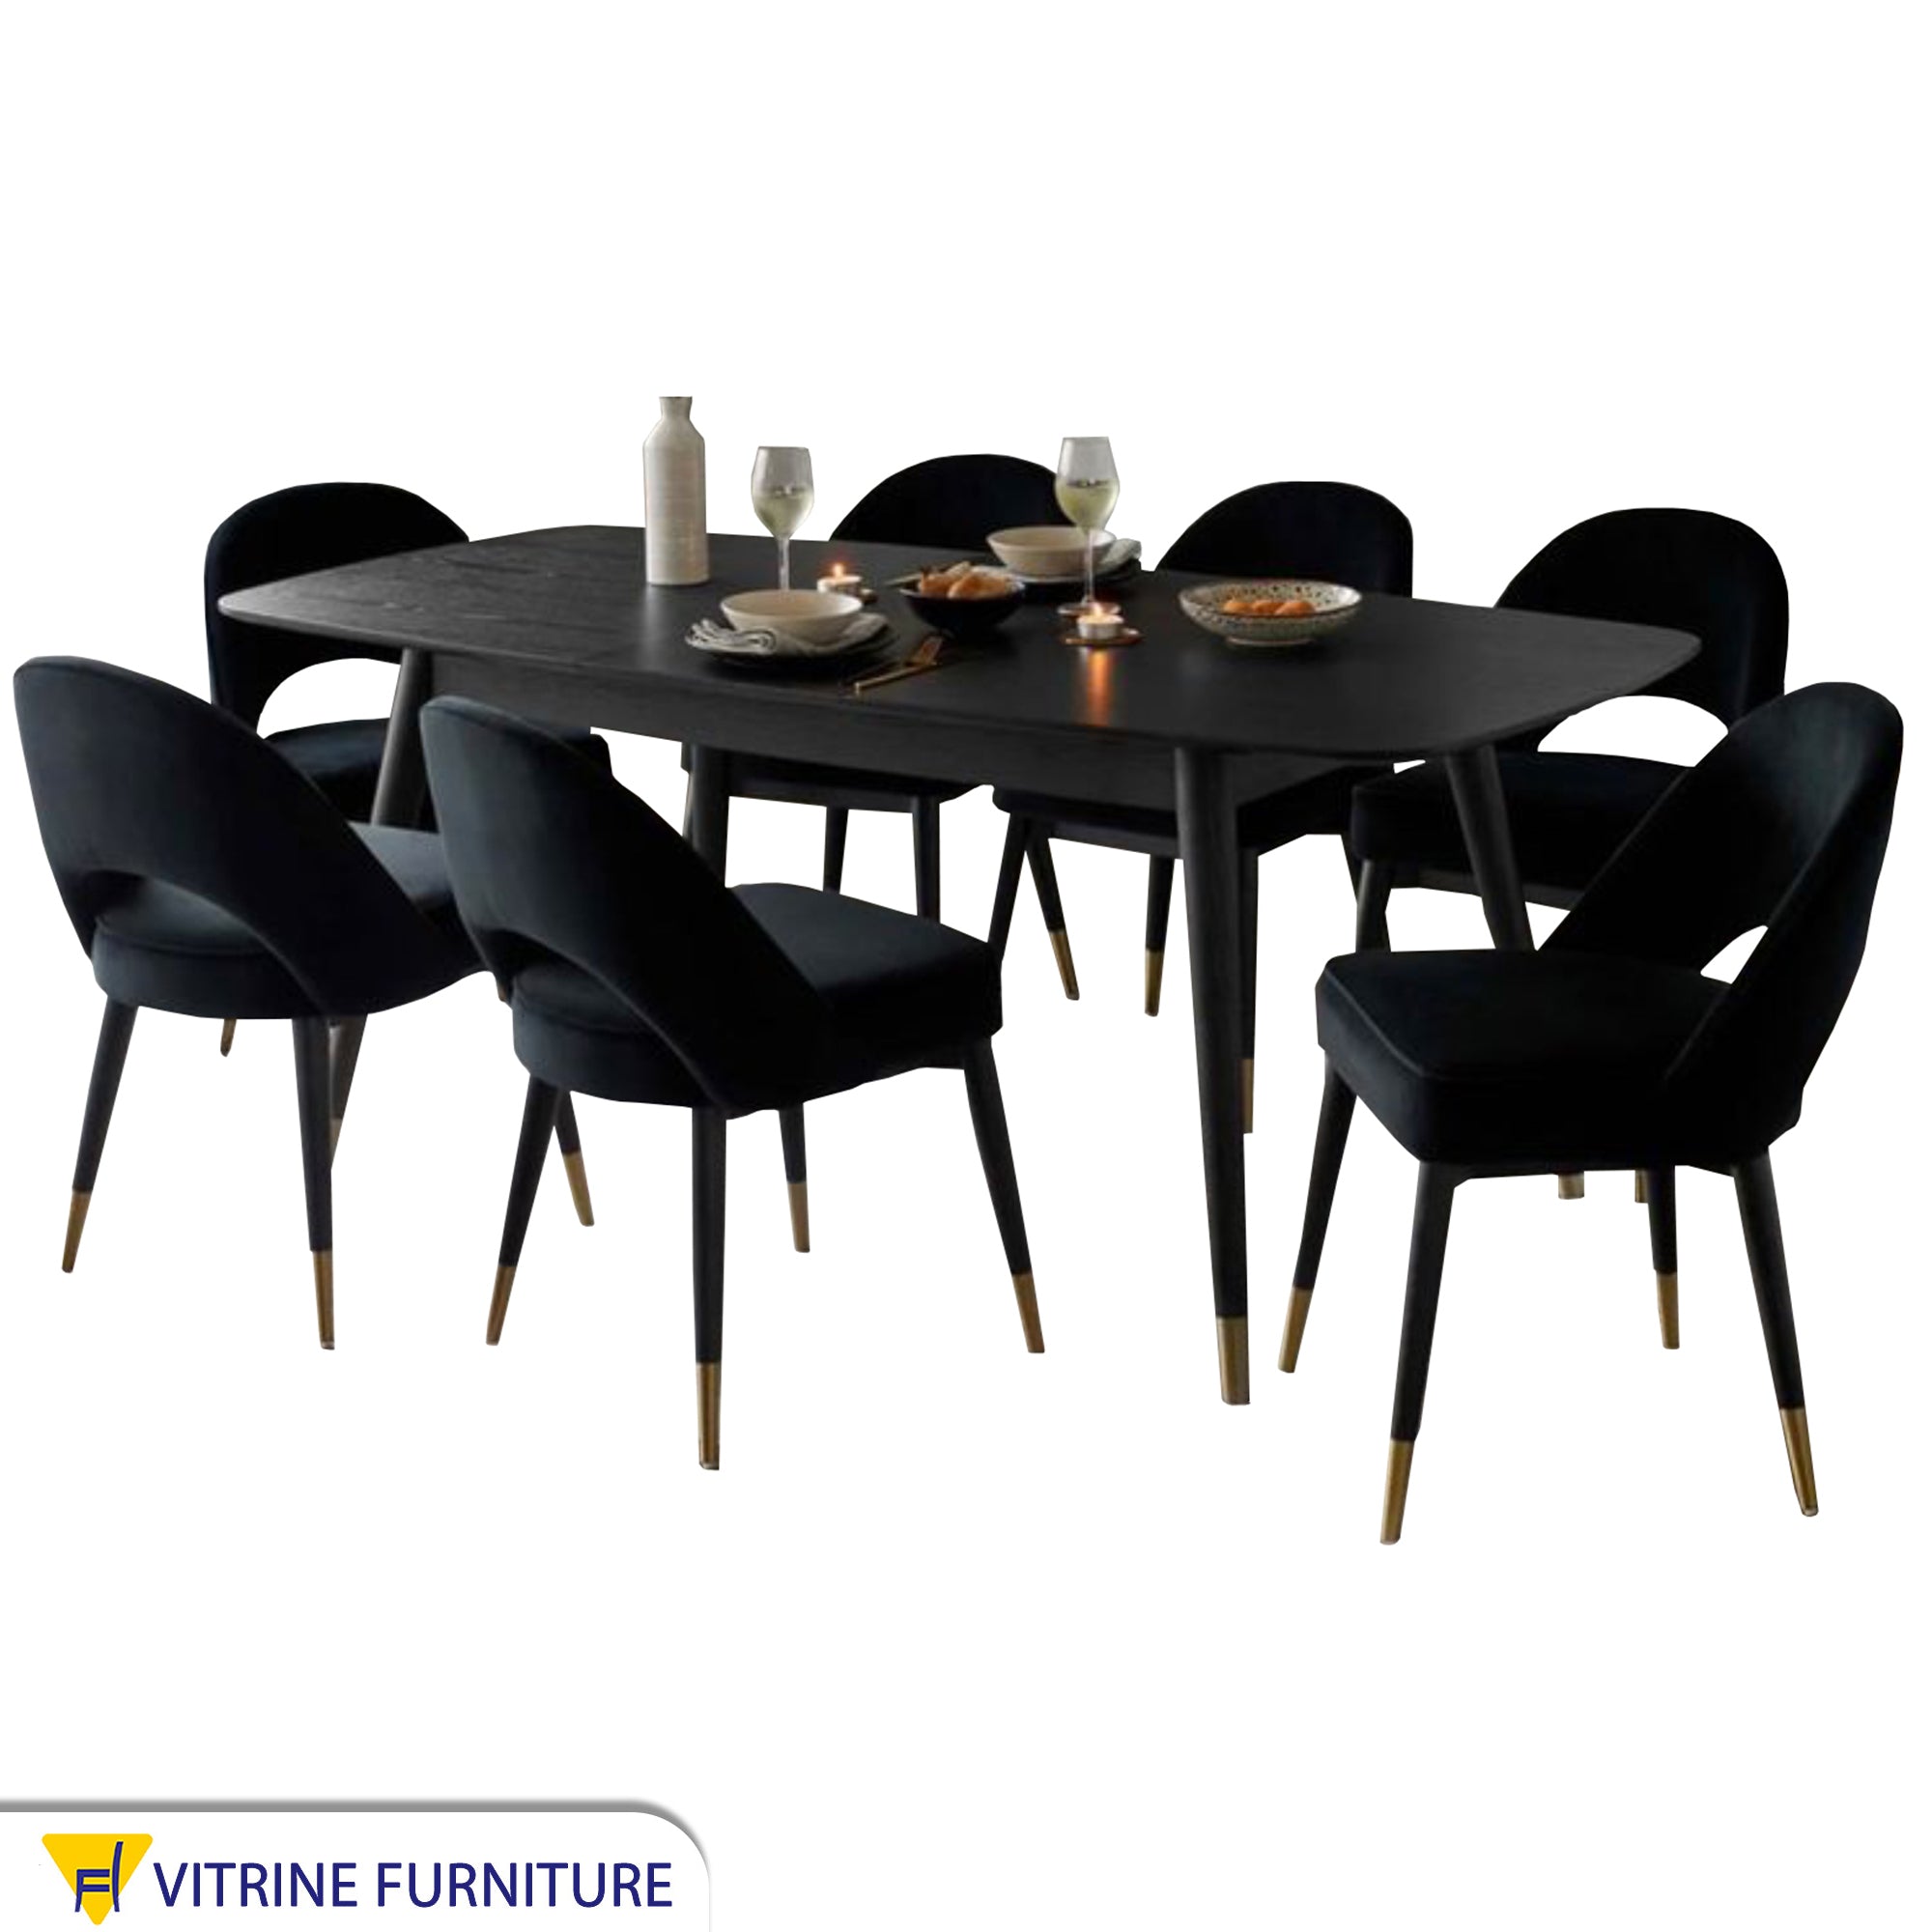 Family dining table in black